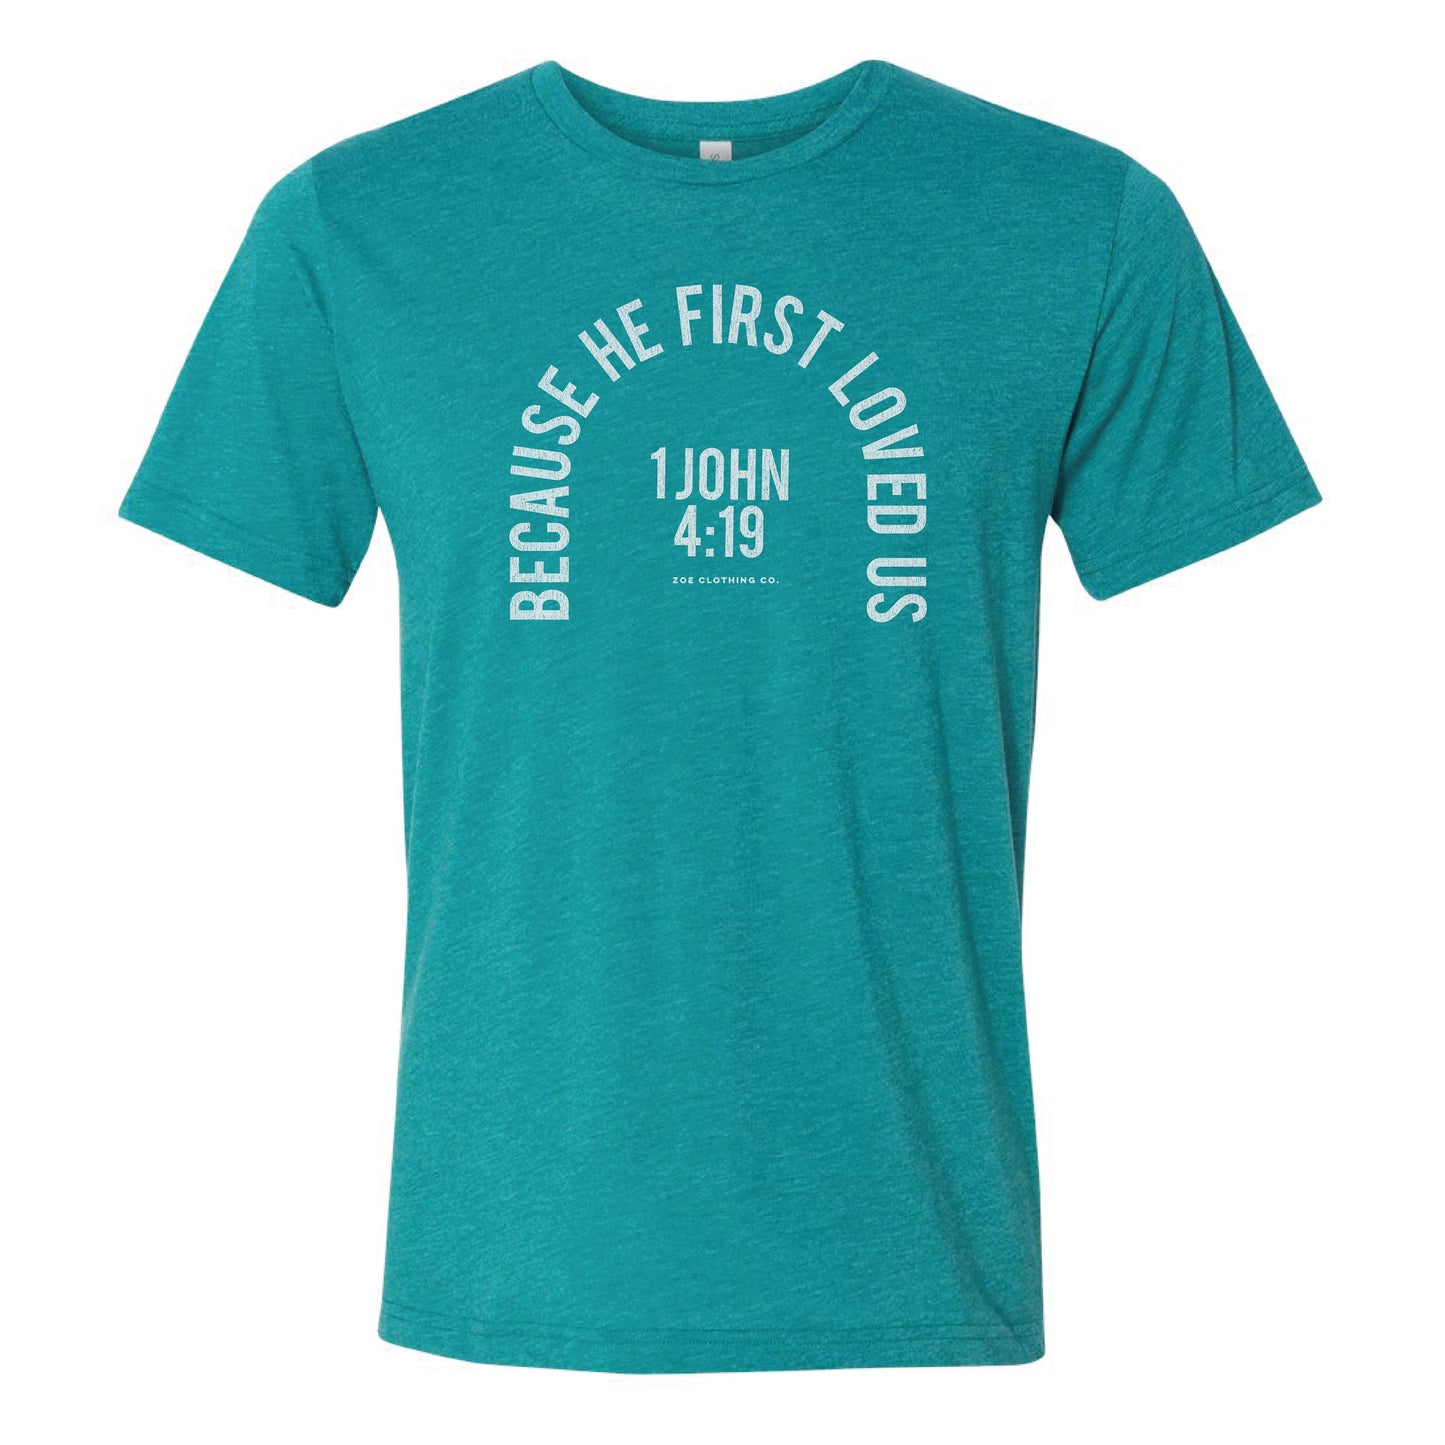 Because He First Loved Us (Unisex)